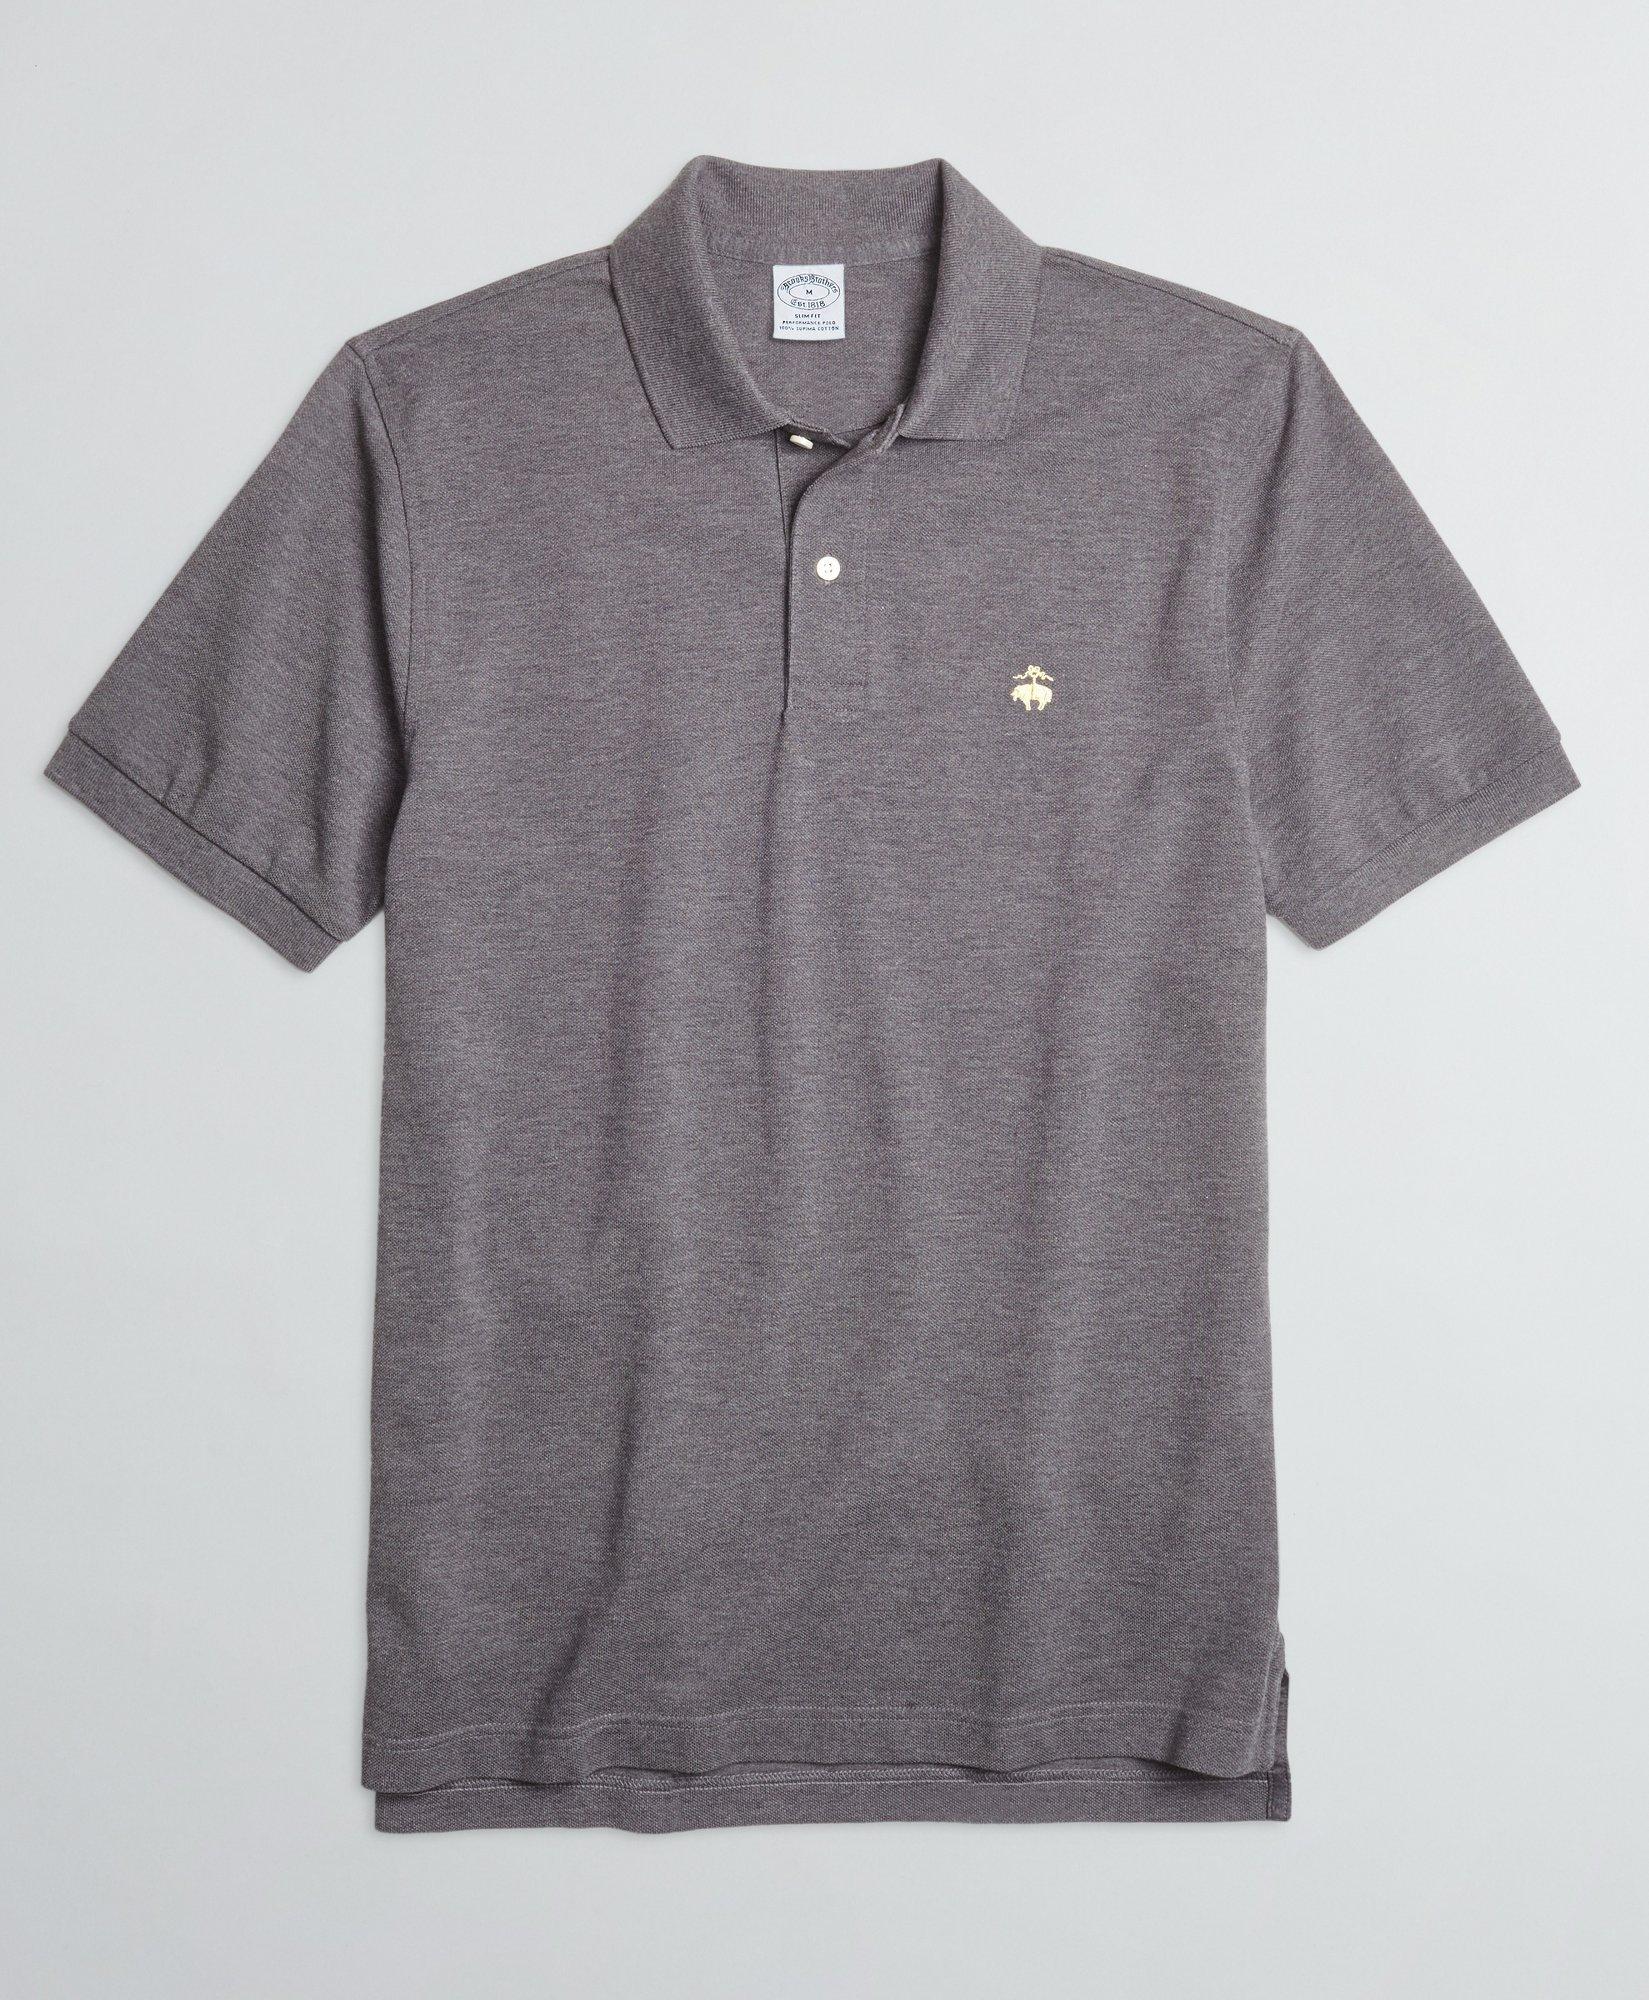 Brooks Brothers Golden Fleece Stretch Supima Polo Shirt | Charcoal Heather | Size Xs